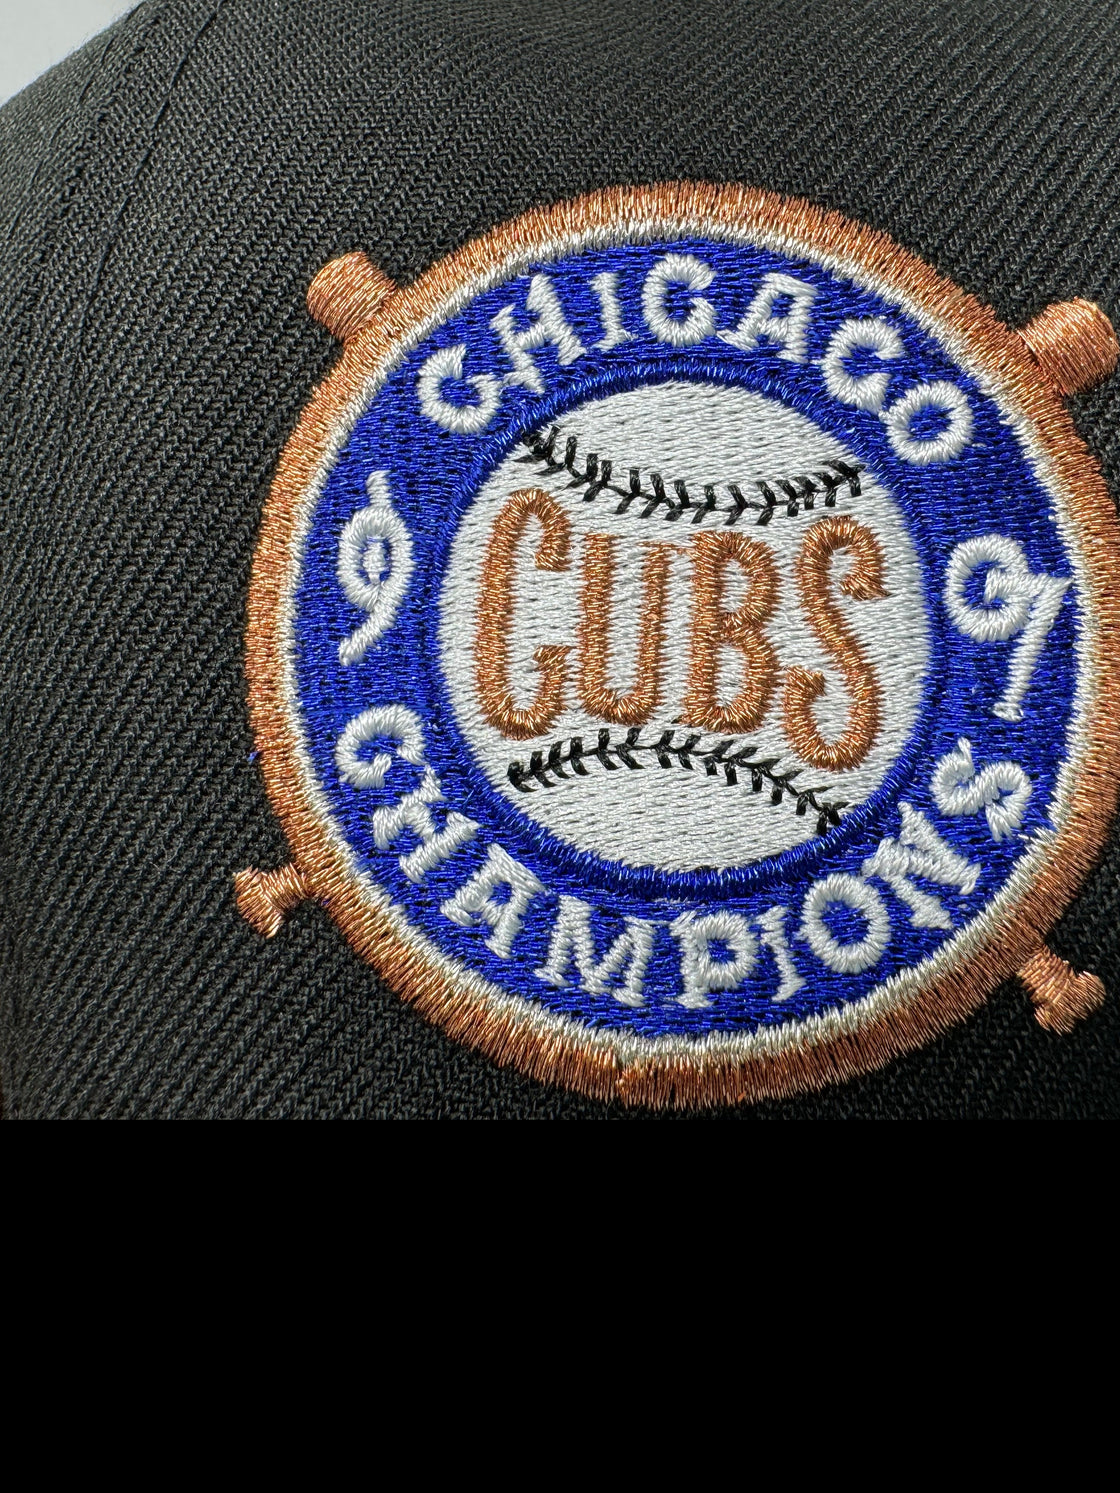 Chicago Cubs 1907 World Series Champions Mascot logo New Era Fitted Hat